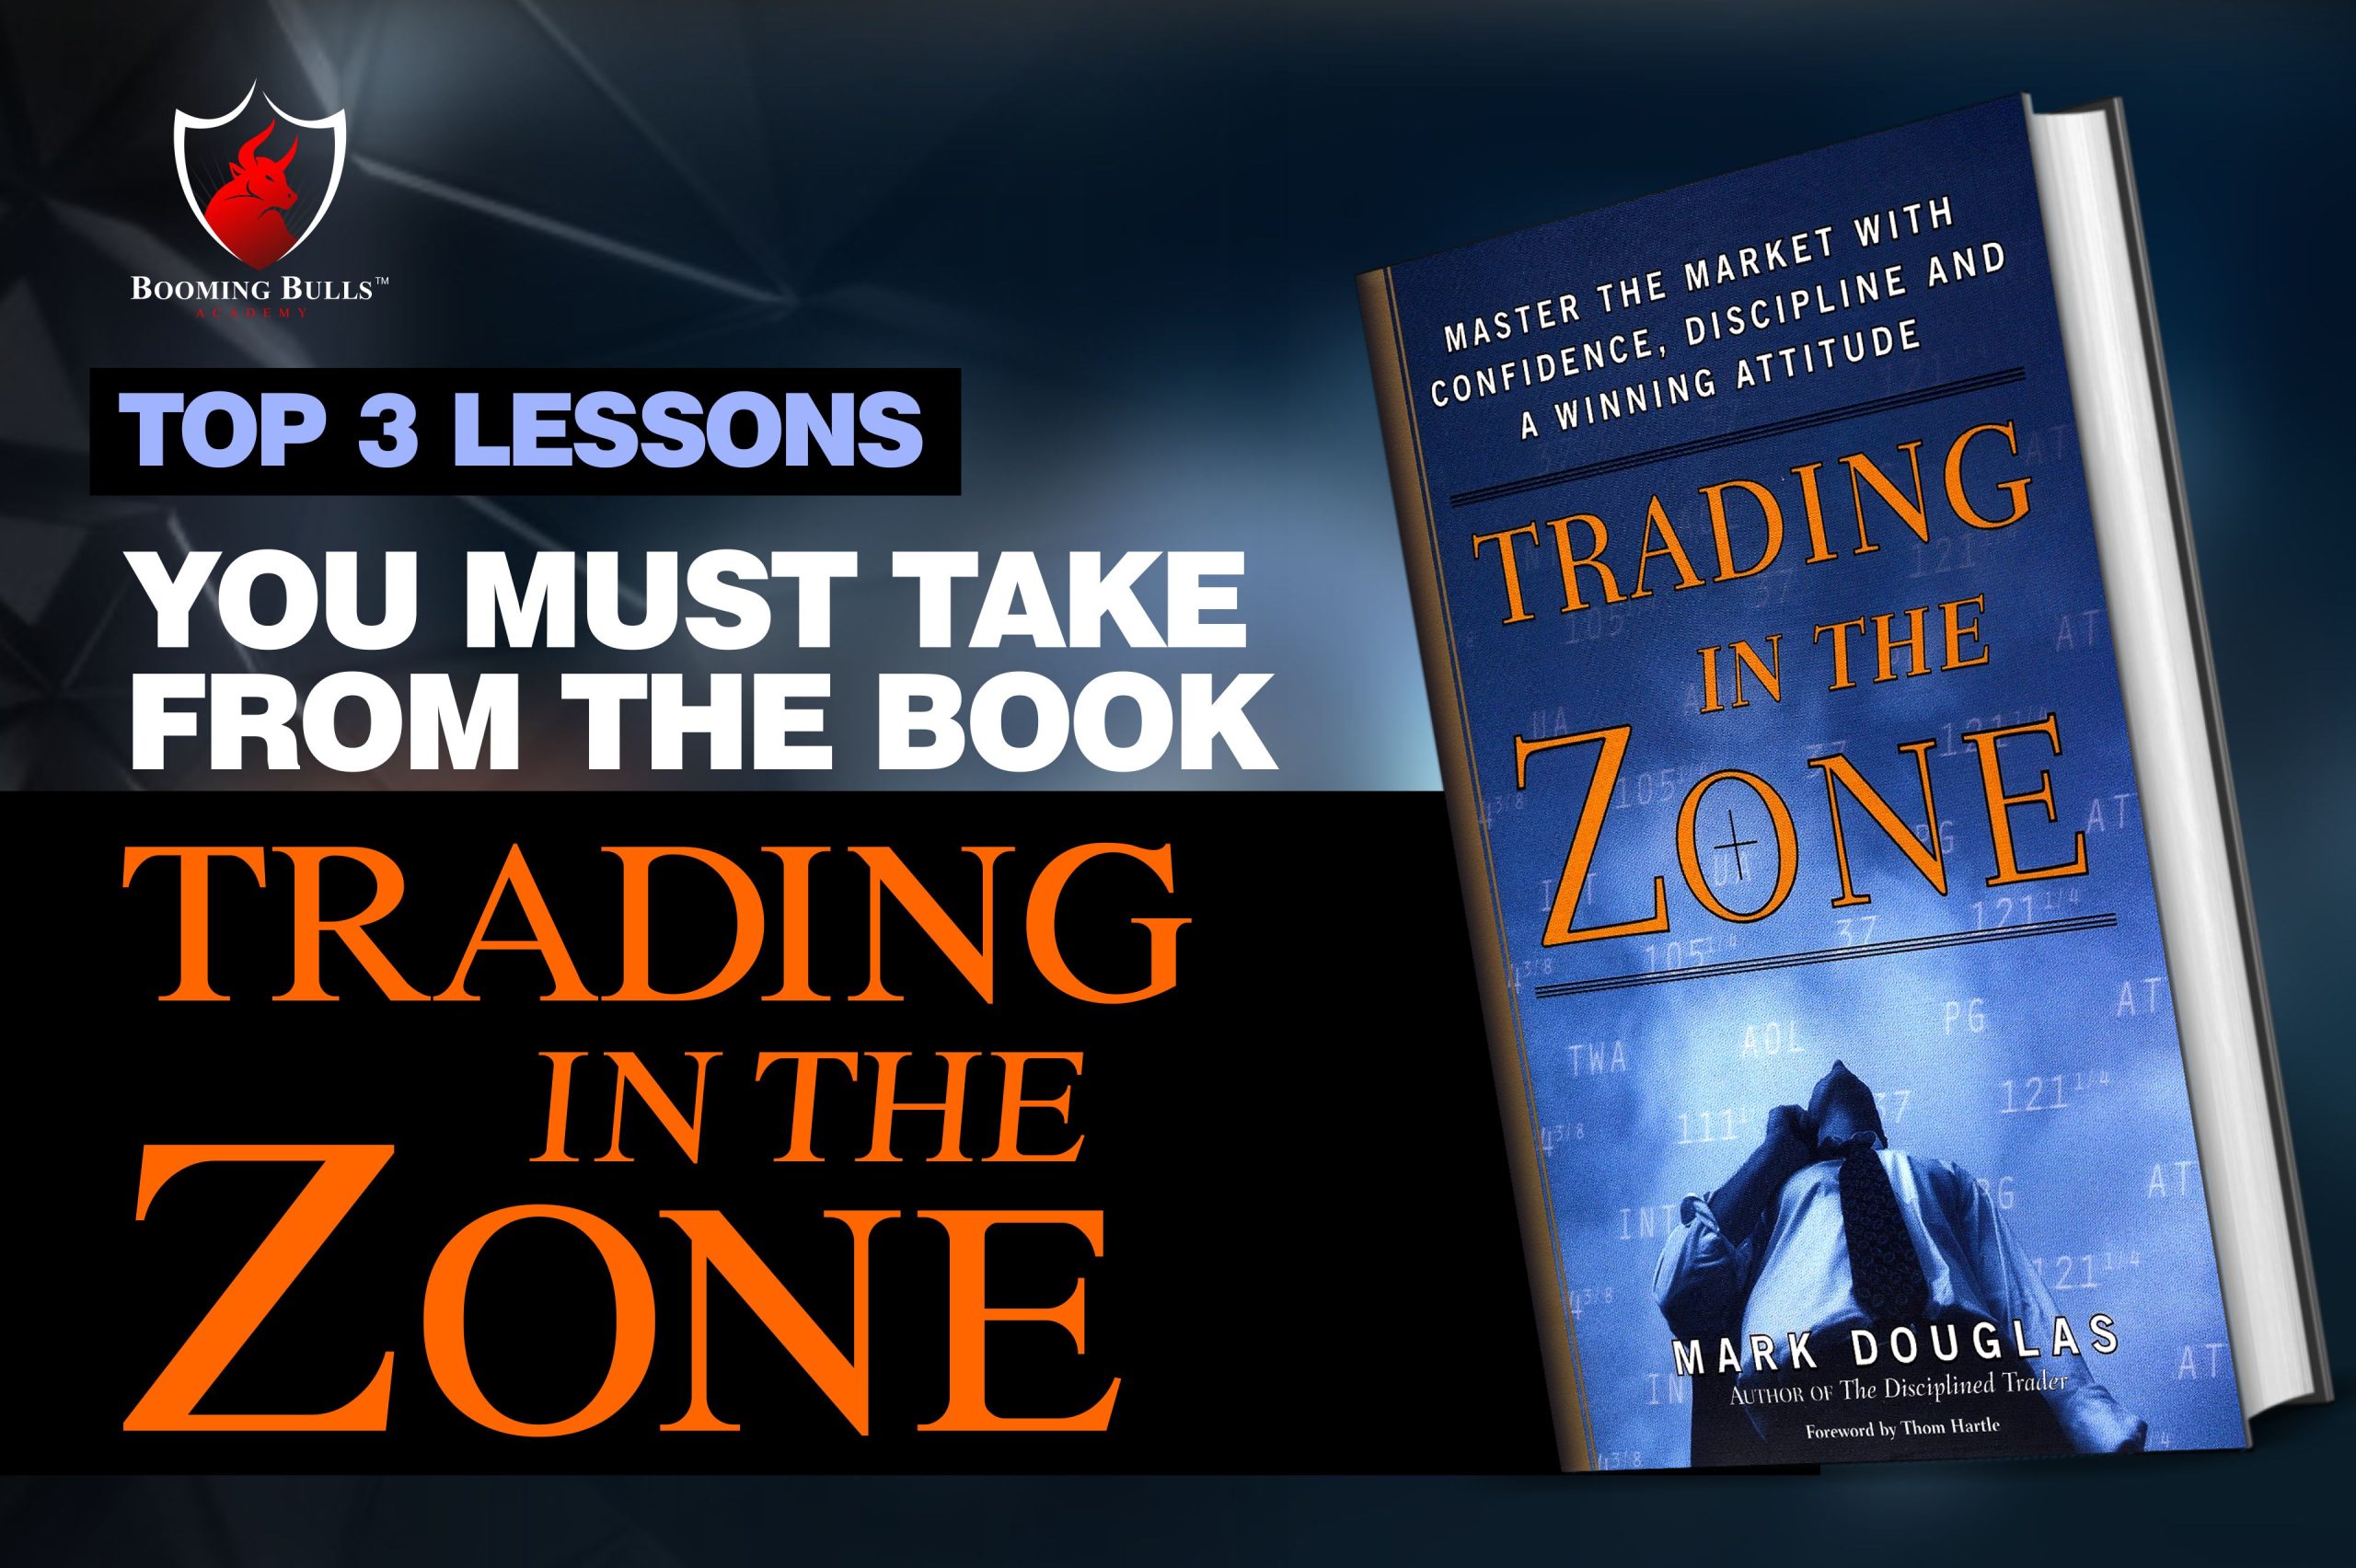 Top 3 Lessons You Must Take From The Book “Trading In The Zone”